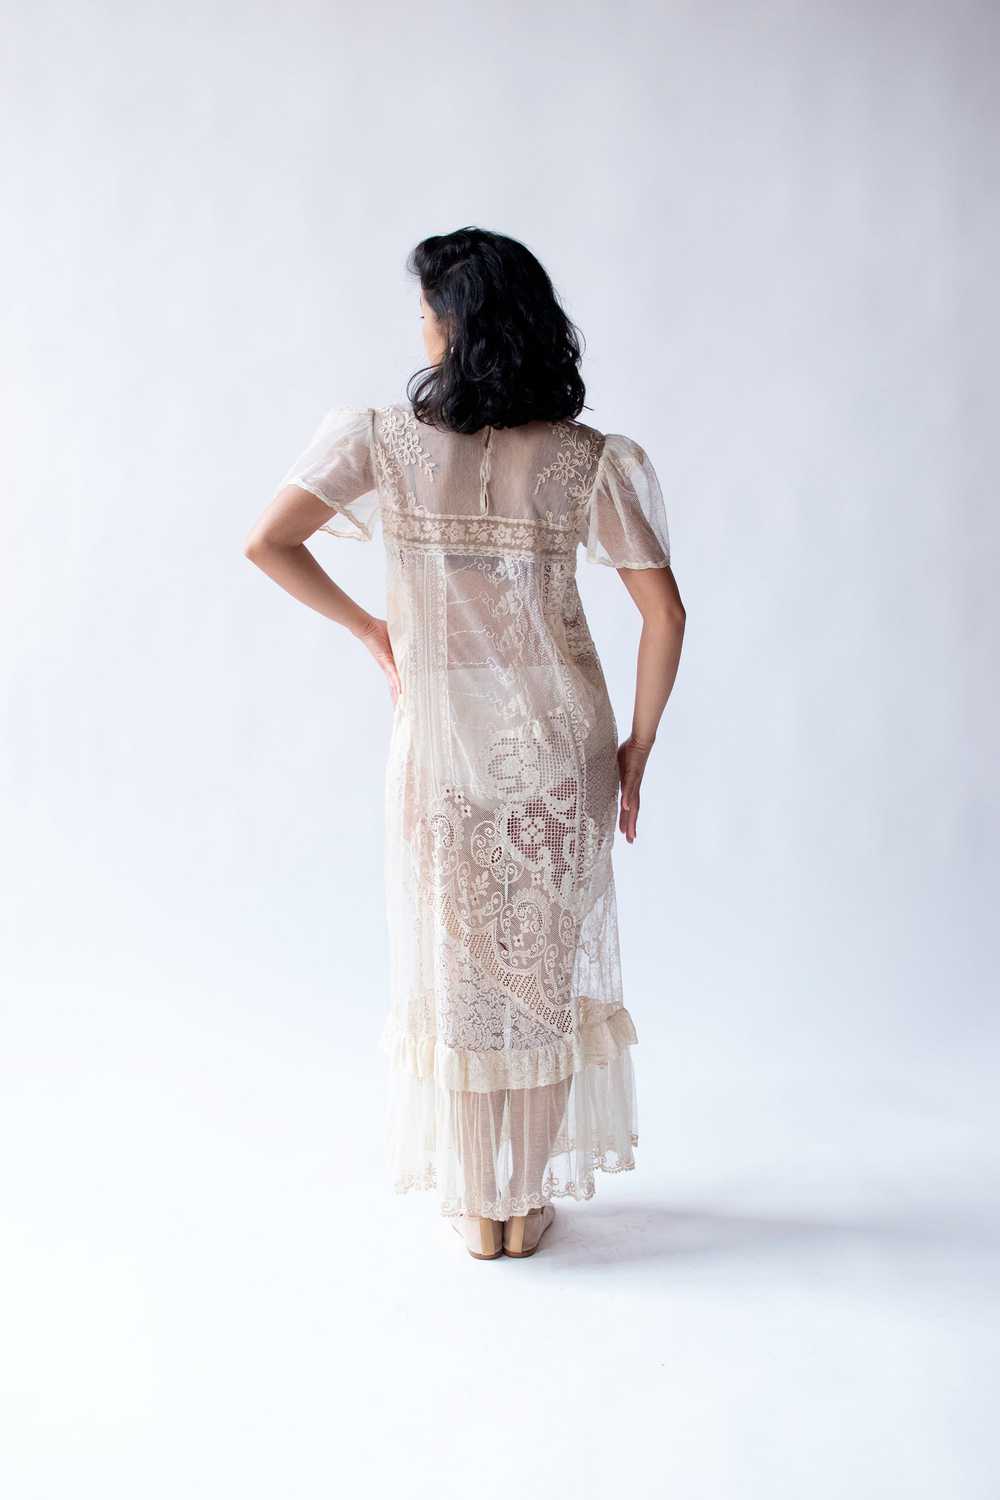 1980s Lace Works Dress - image 4